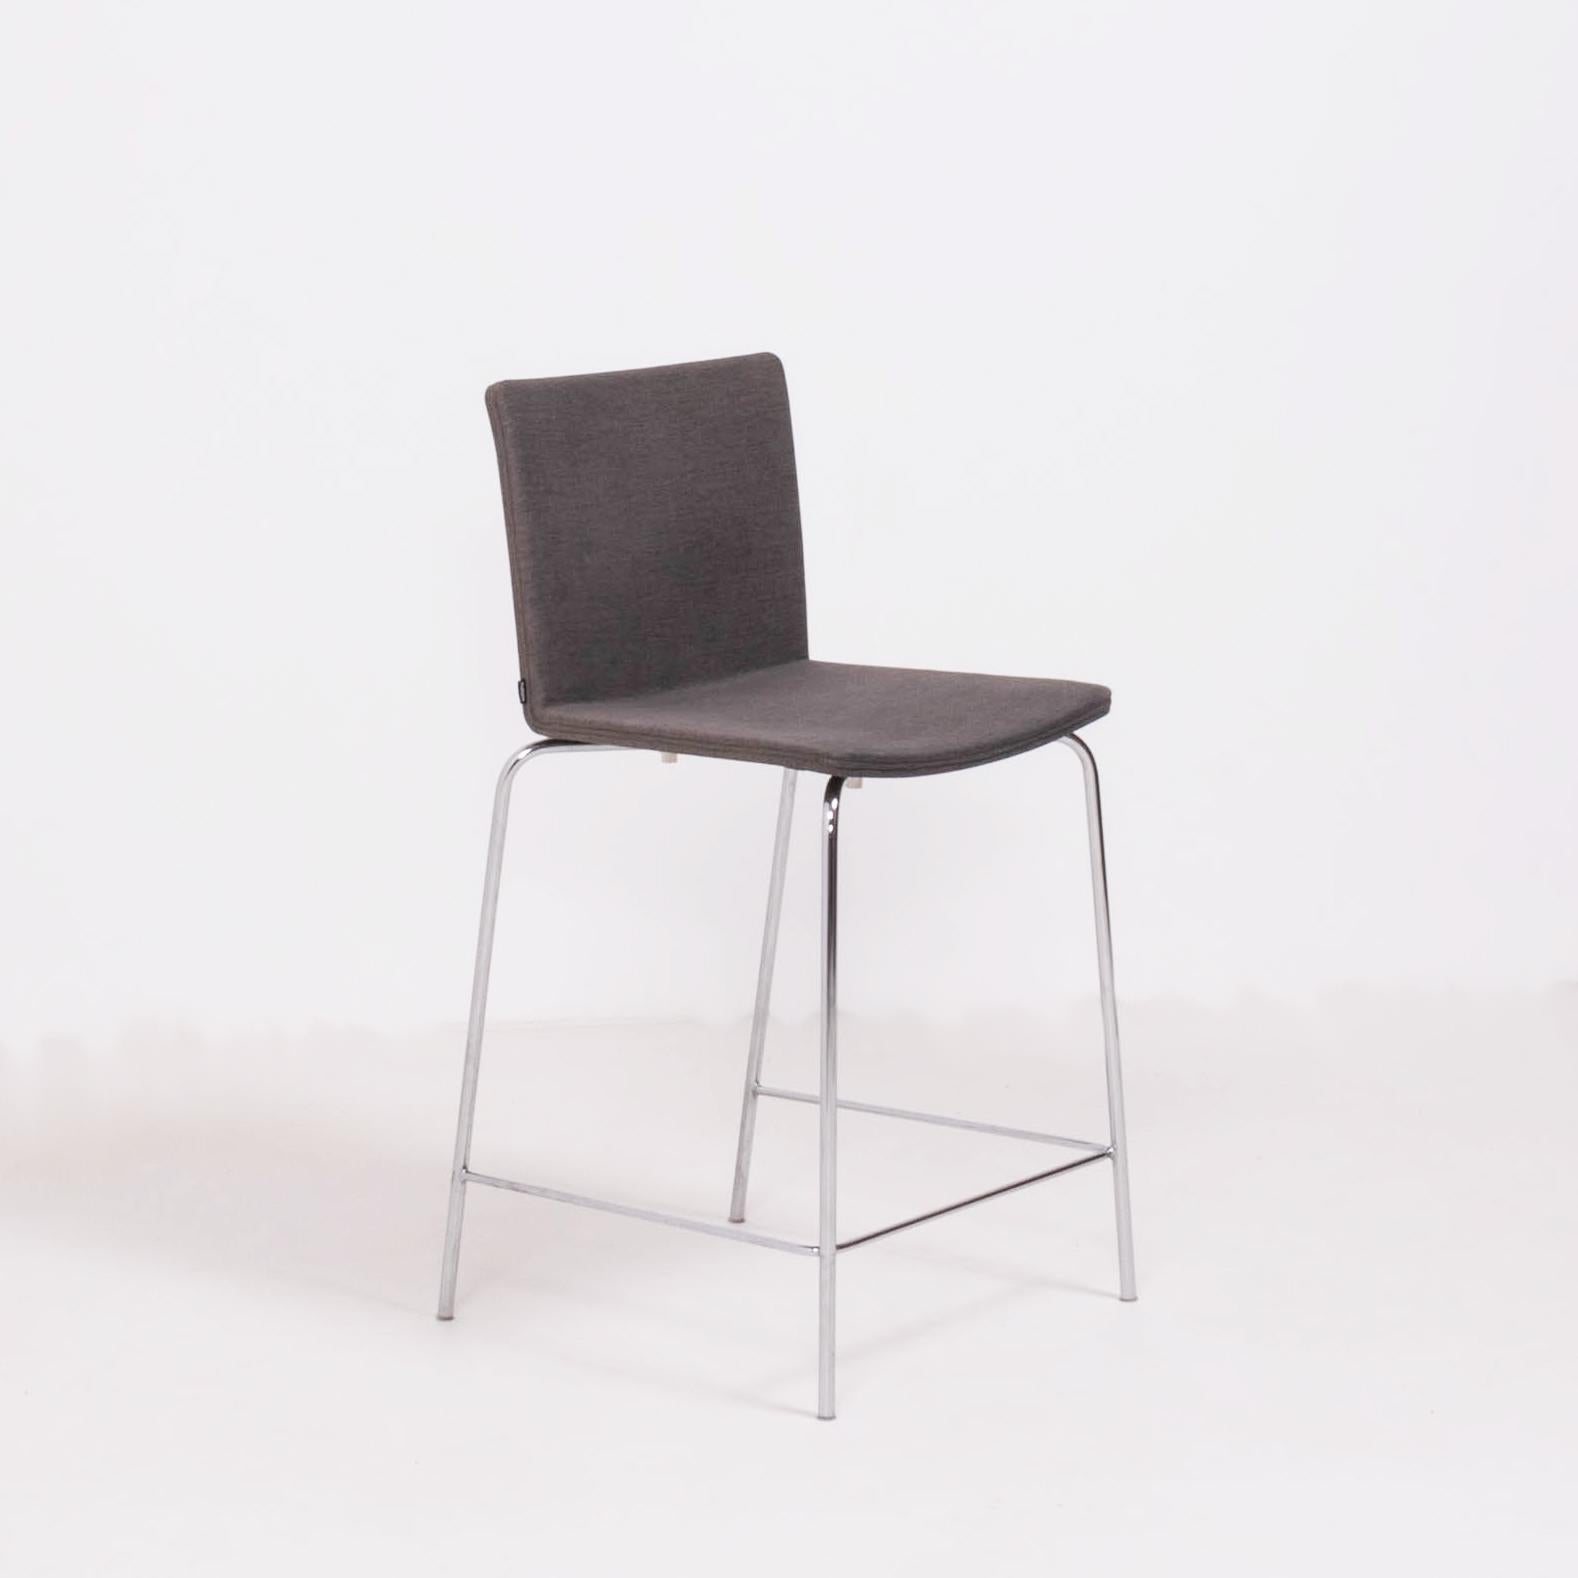 Originally designed by Mario Mazzer for Poliform in 2003, the Nex stool is the epitome of sleek and modern design.

Featuring a chromed metal frame with a foot rail, the seat is molded for comfort and upholstered in a classic light grey